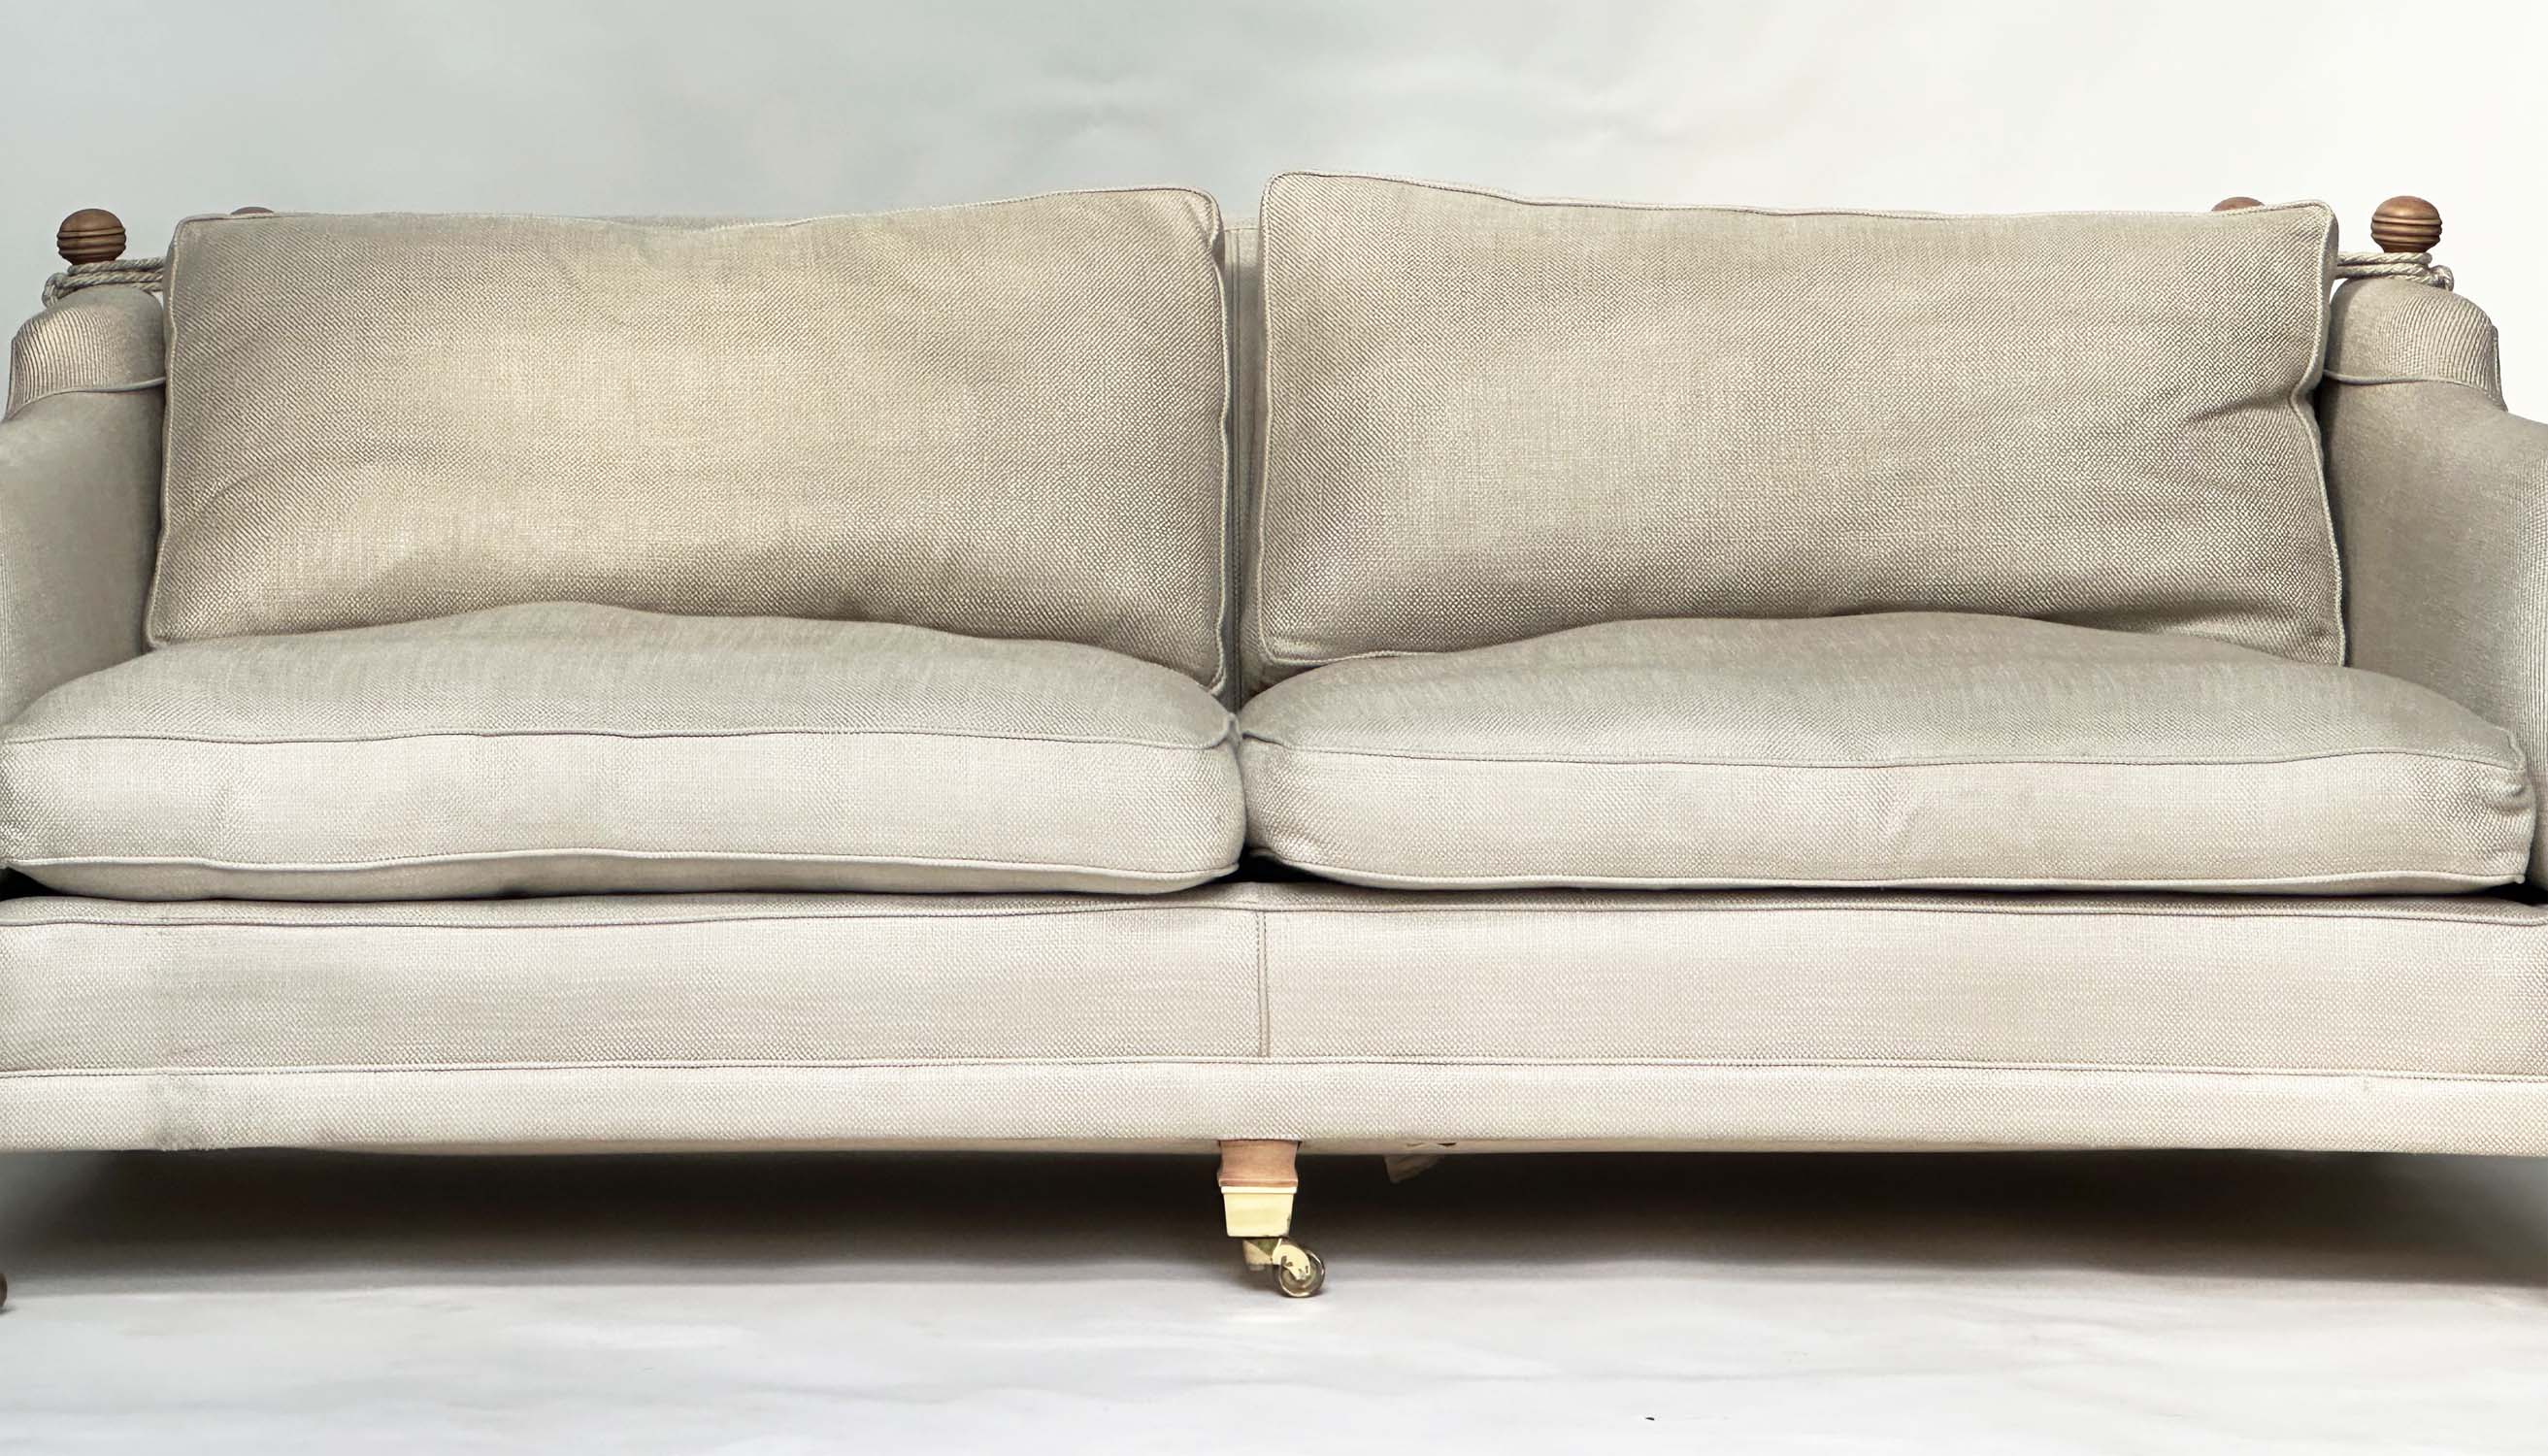 KNOLL SOFA BY DURESTA, grey linen upholstered with down swept arms, feather filled cushions and - Bild 13 aus 14